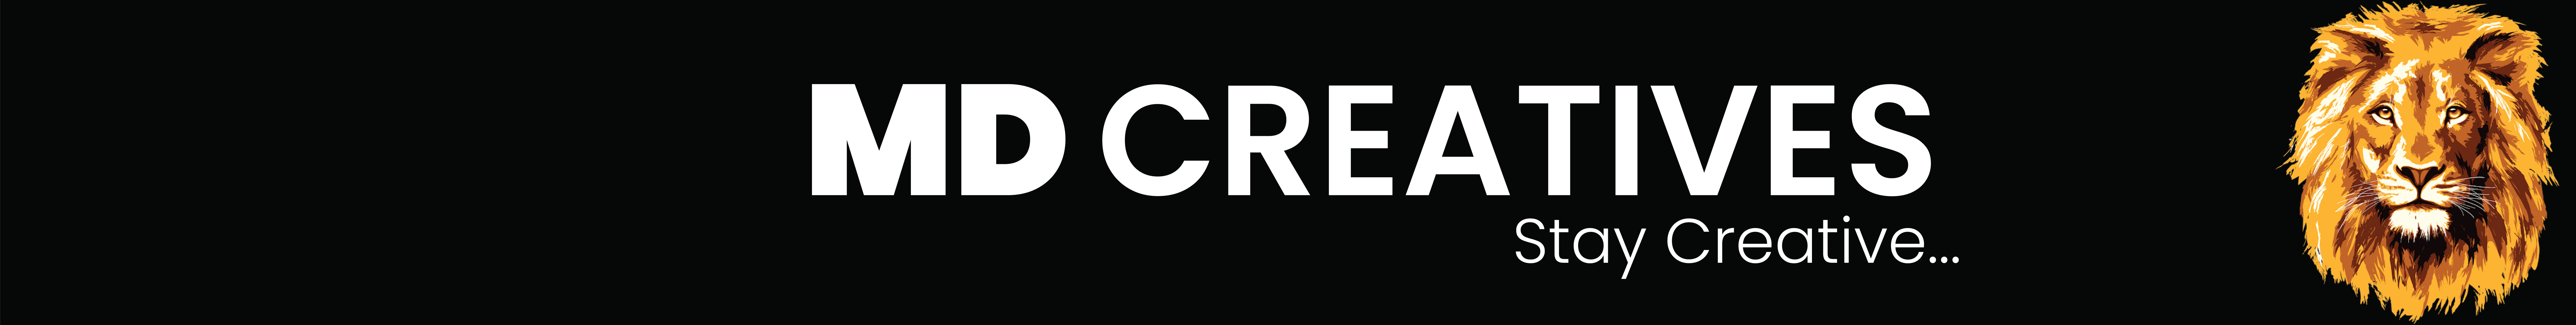 MD CREATIVES's profile banner